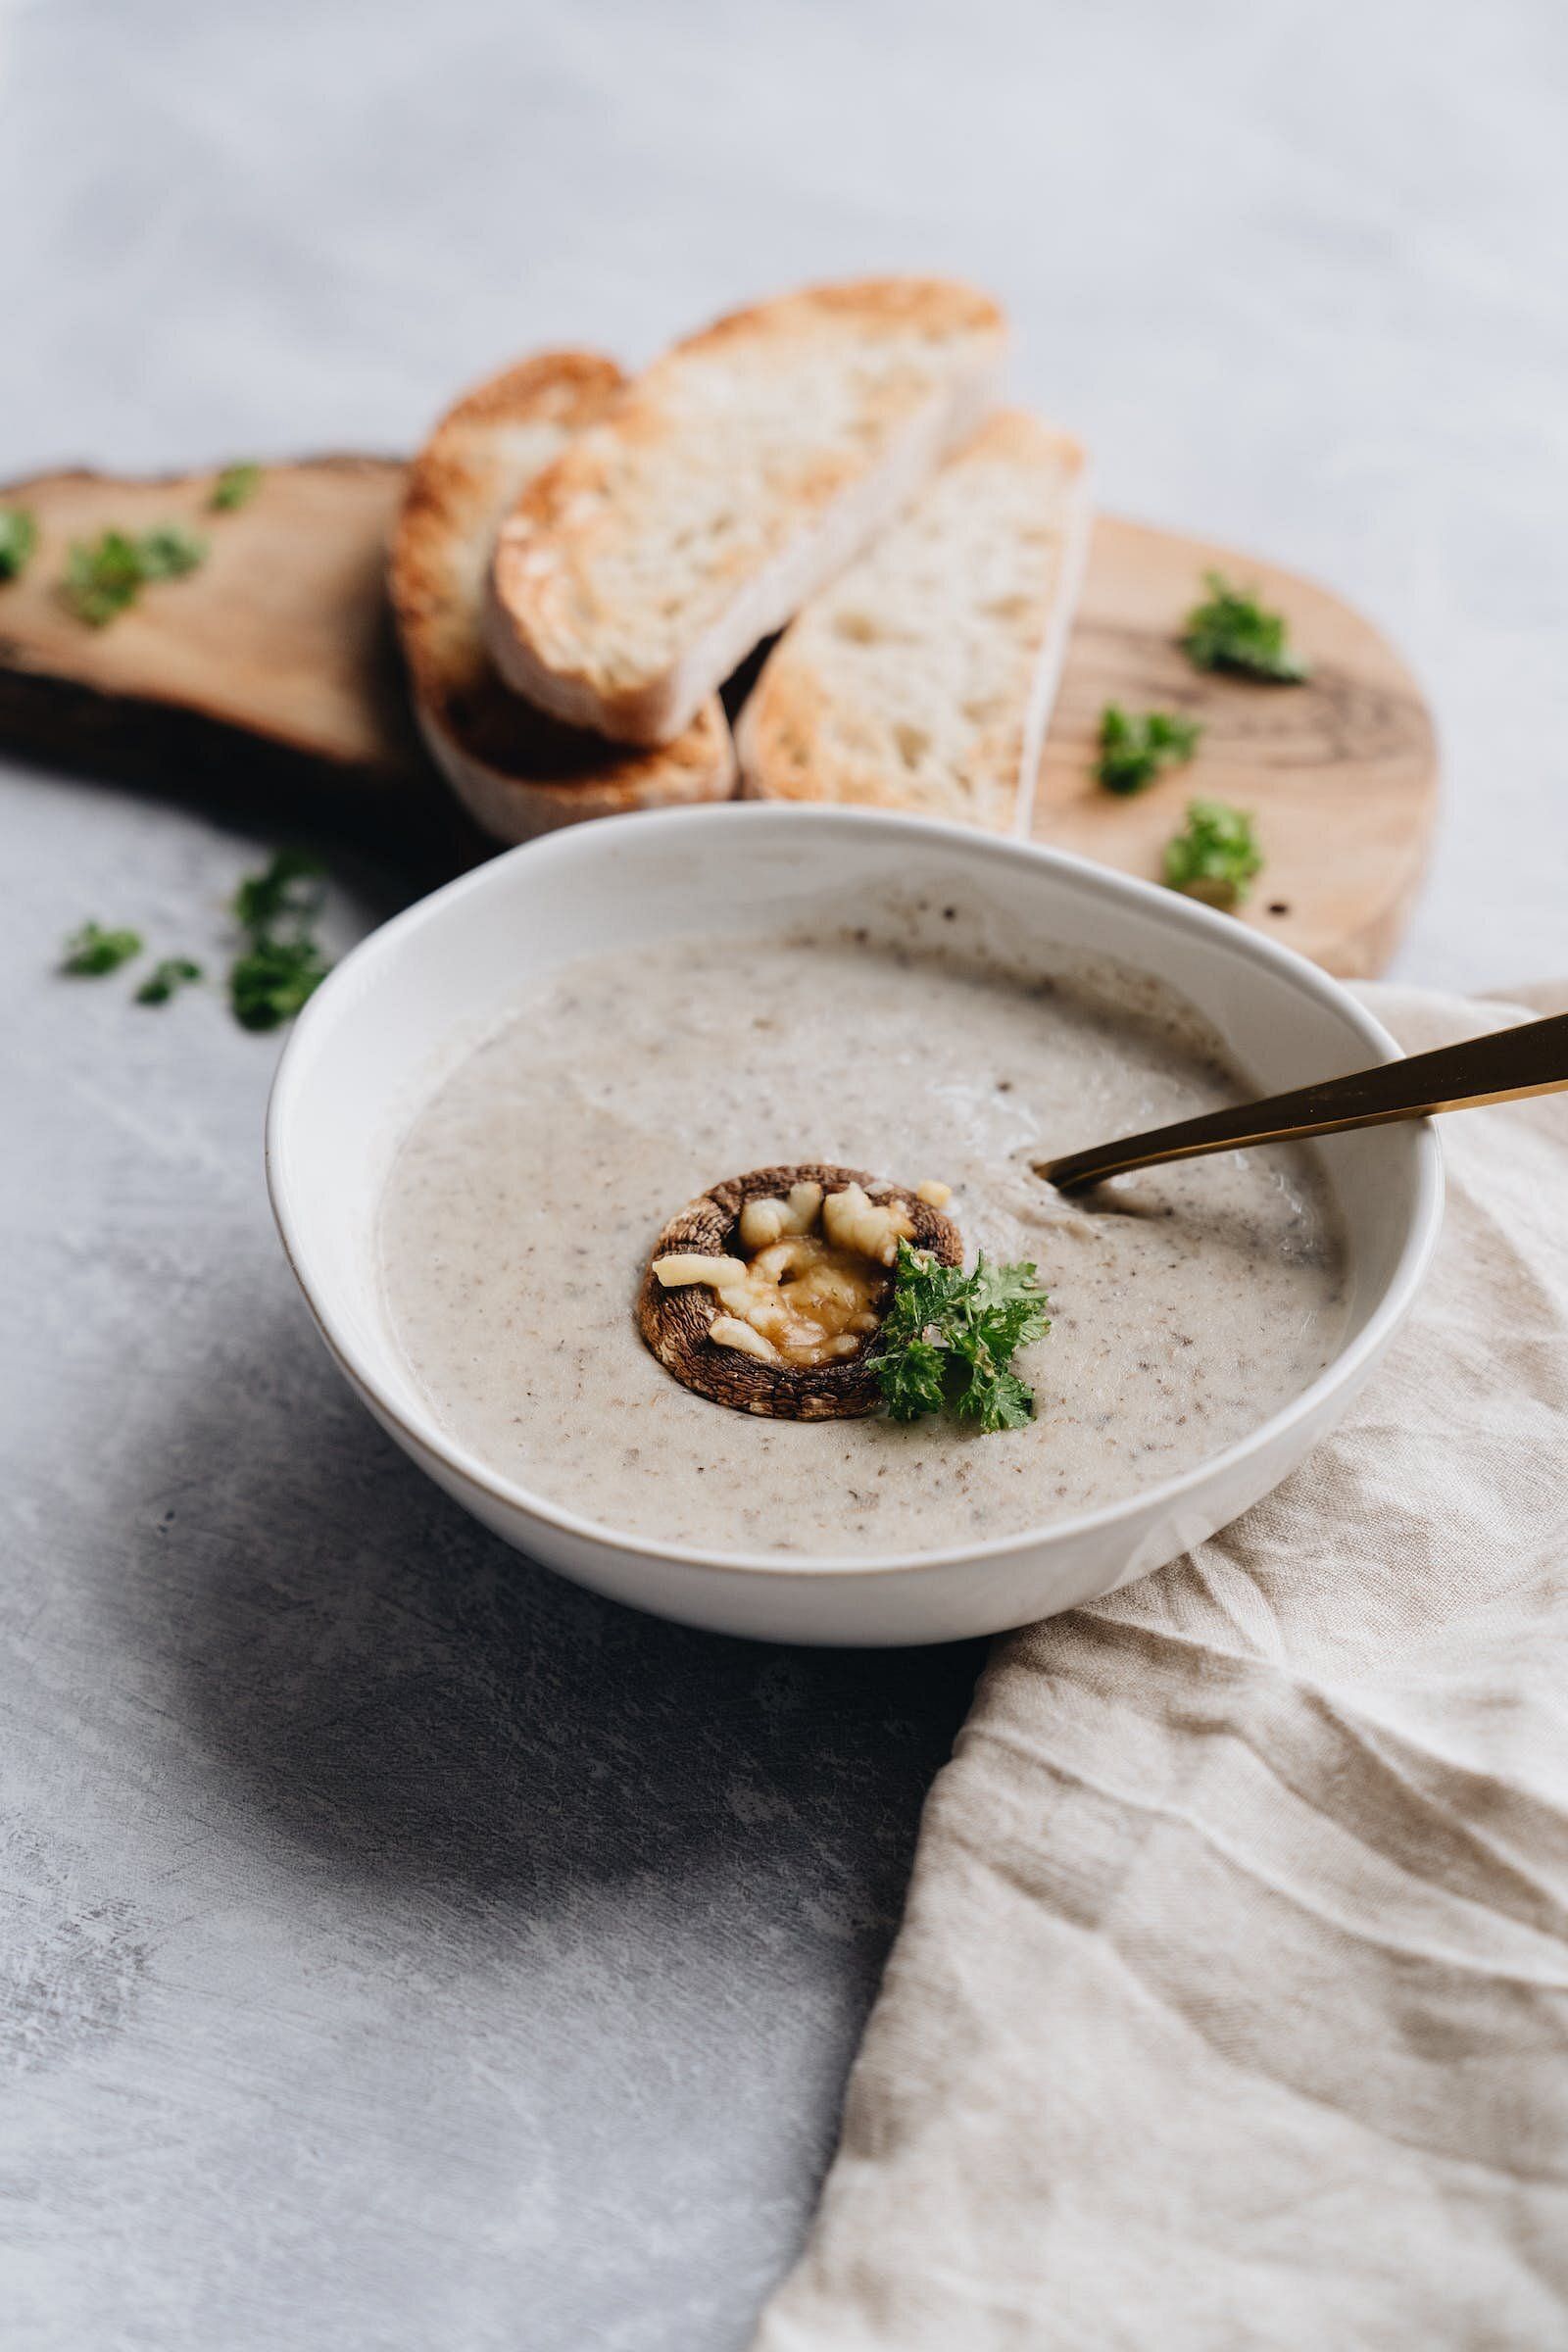 Spinach and mushroom soup (Image source: Pexels)